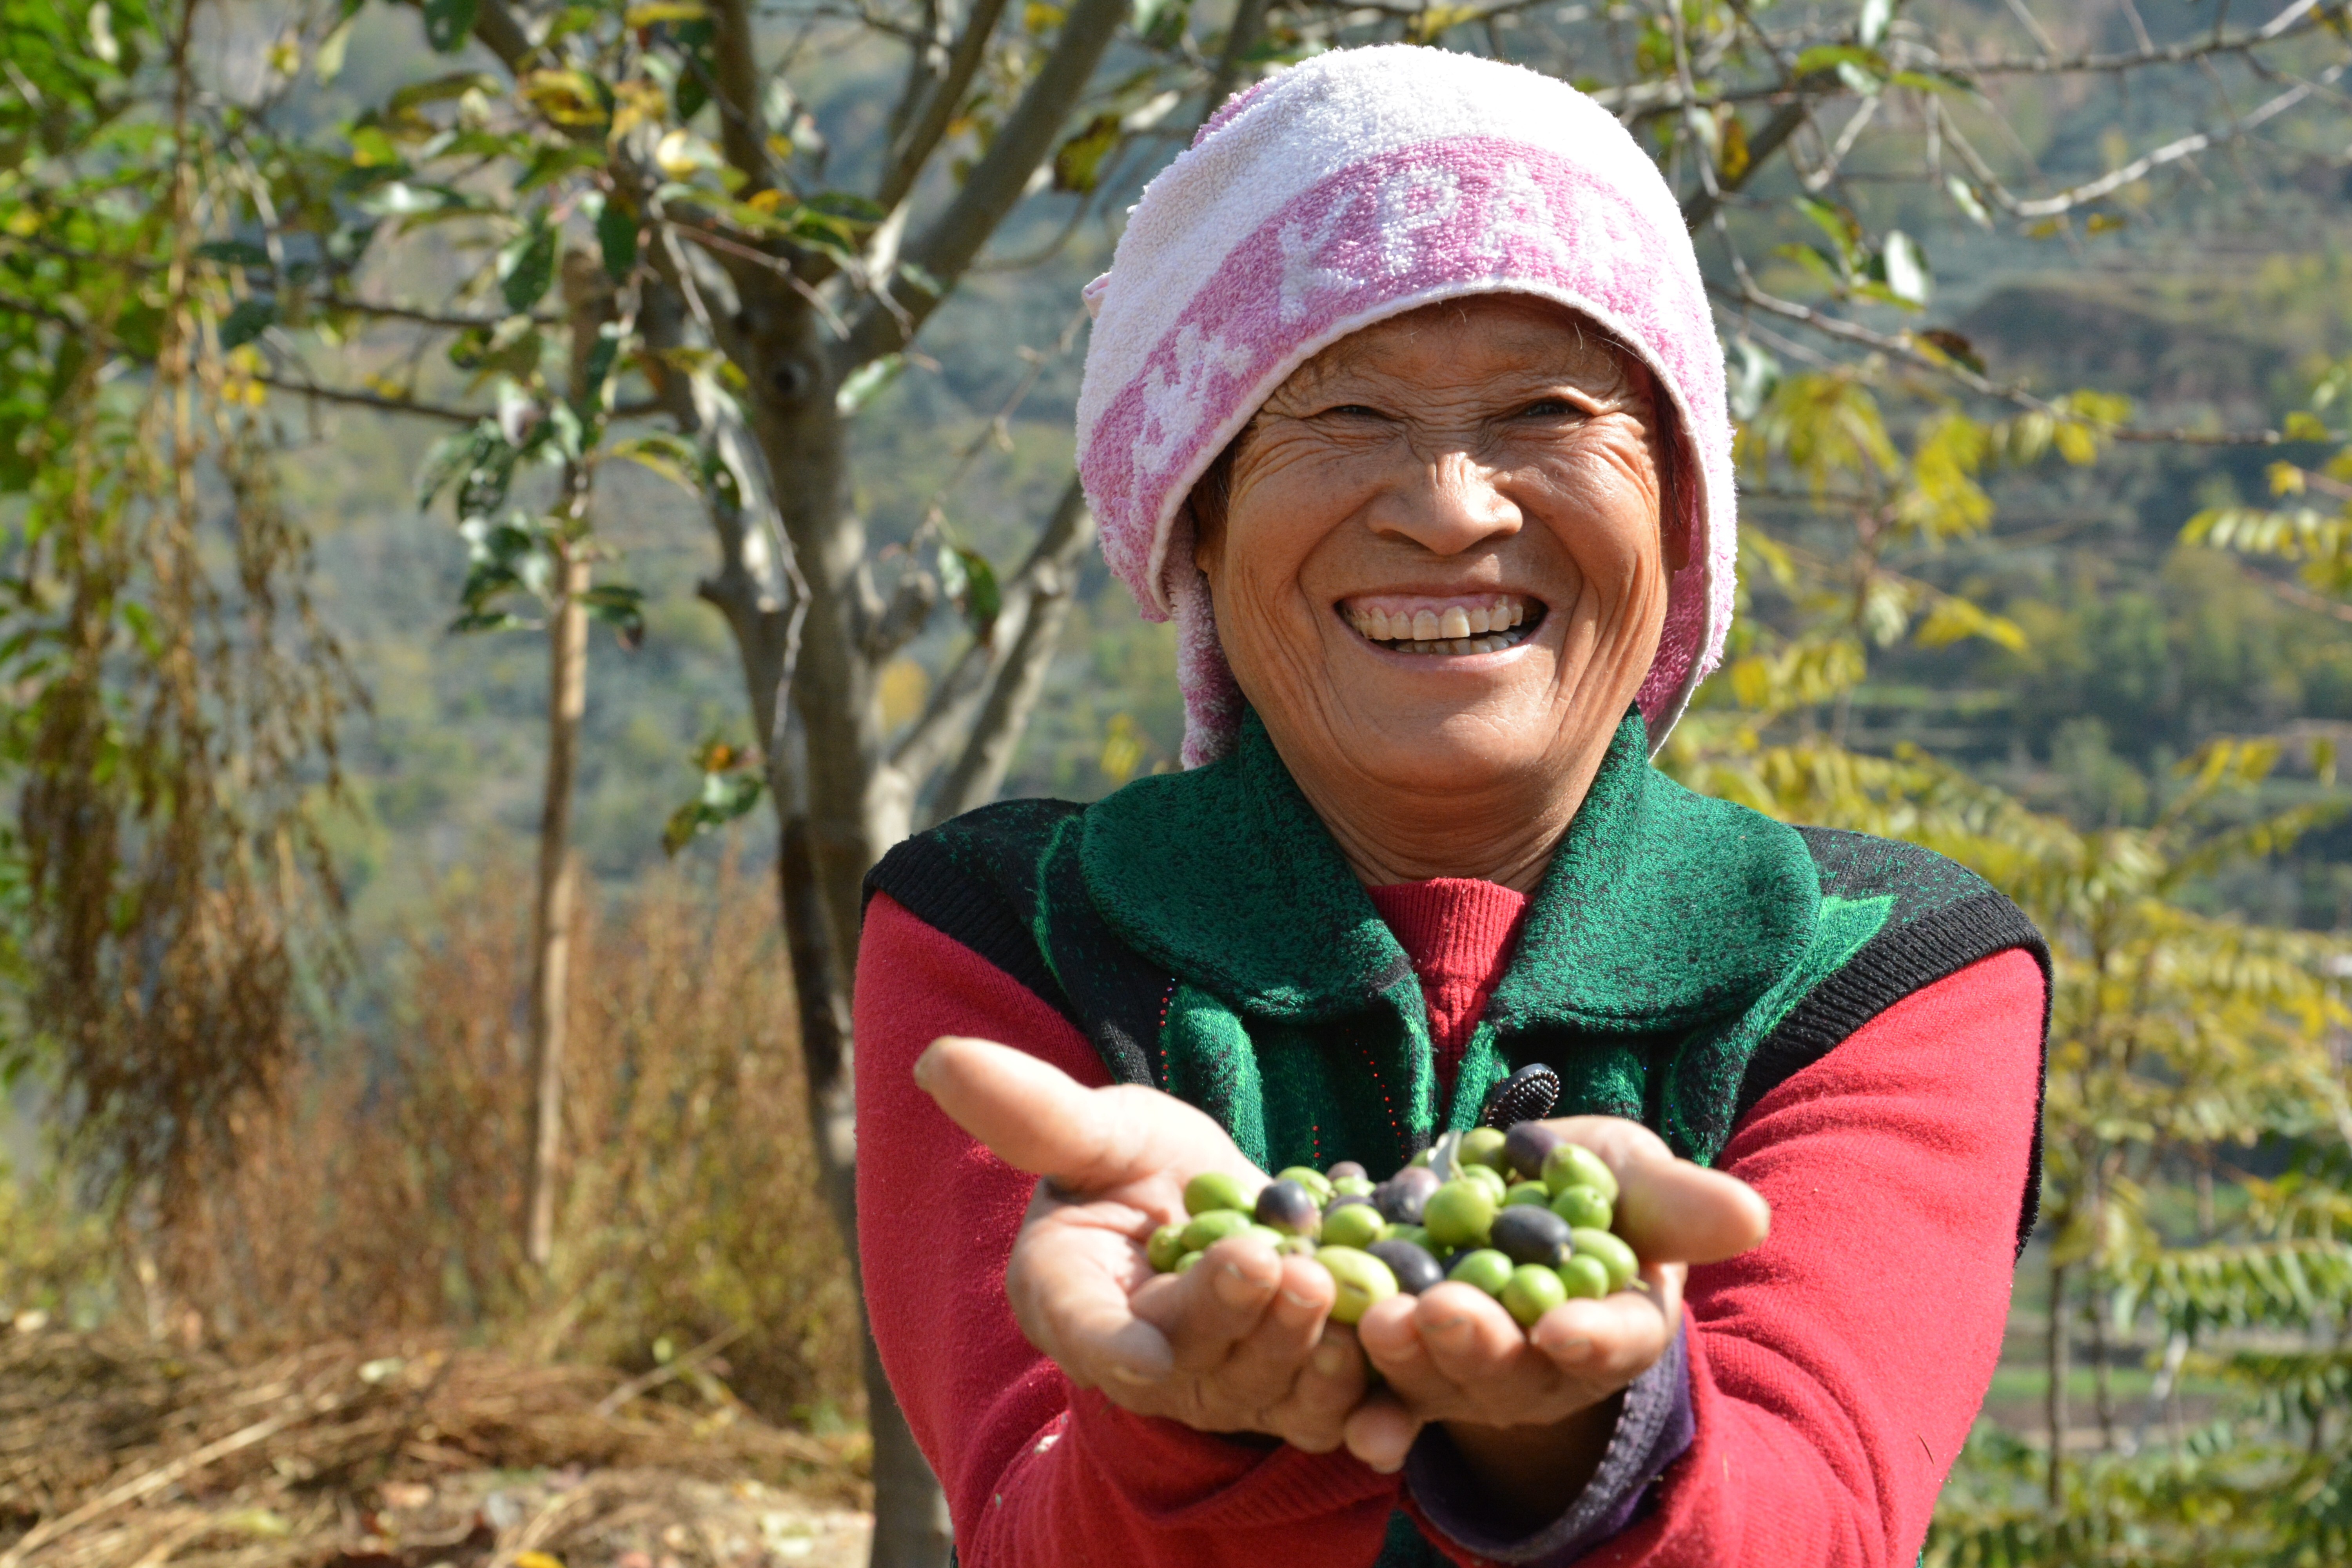 Asia’s love for Evoo shows no sign of slowing down, with producers like the Xiangyu Olive Development Co making oil on par or better than their Mediterranean counterparts. Photo: Xiangyu Olive Development Co